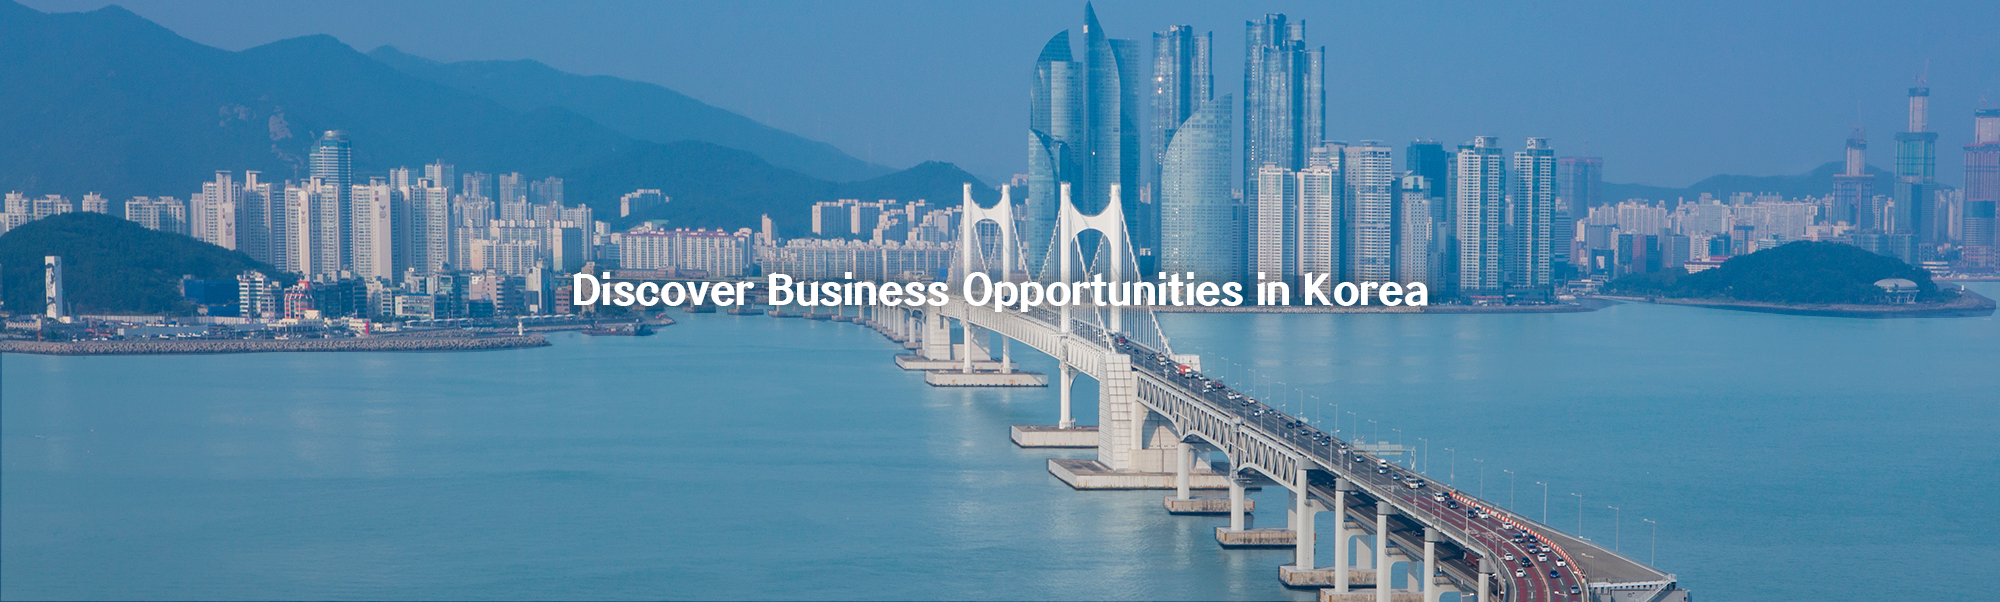 Discover Business Opportunities in Korea